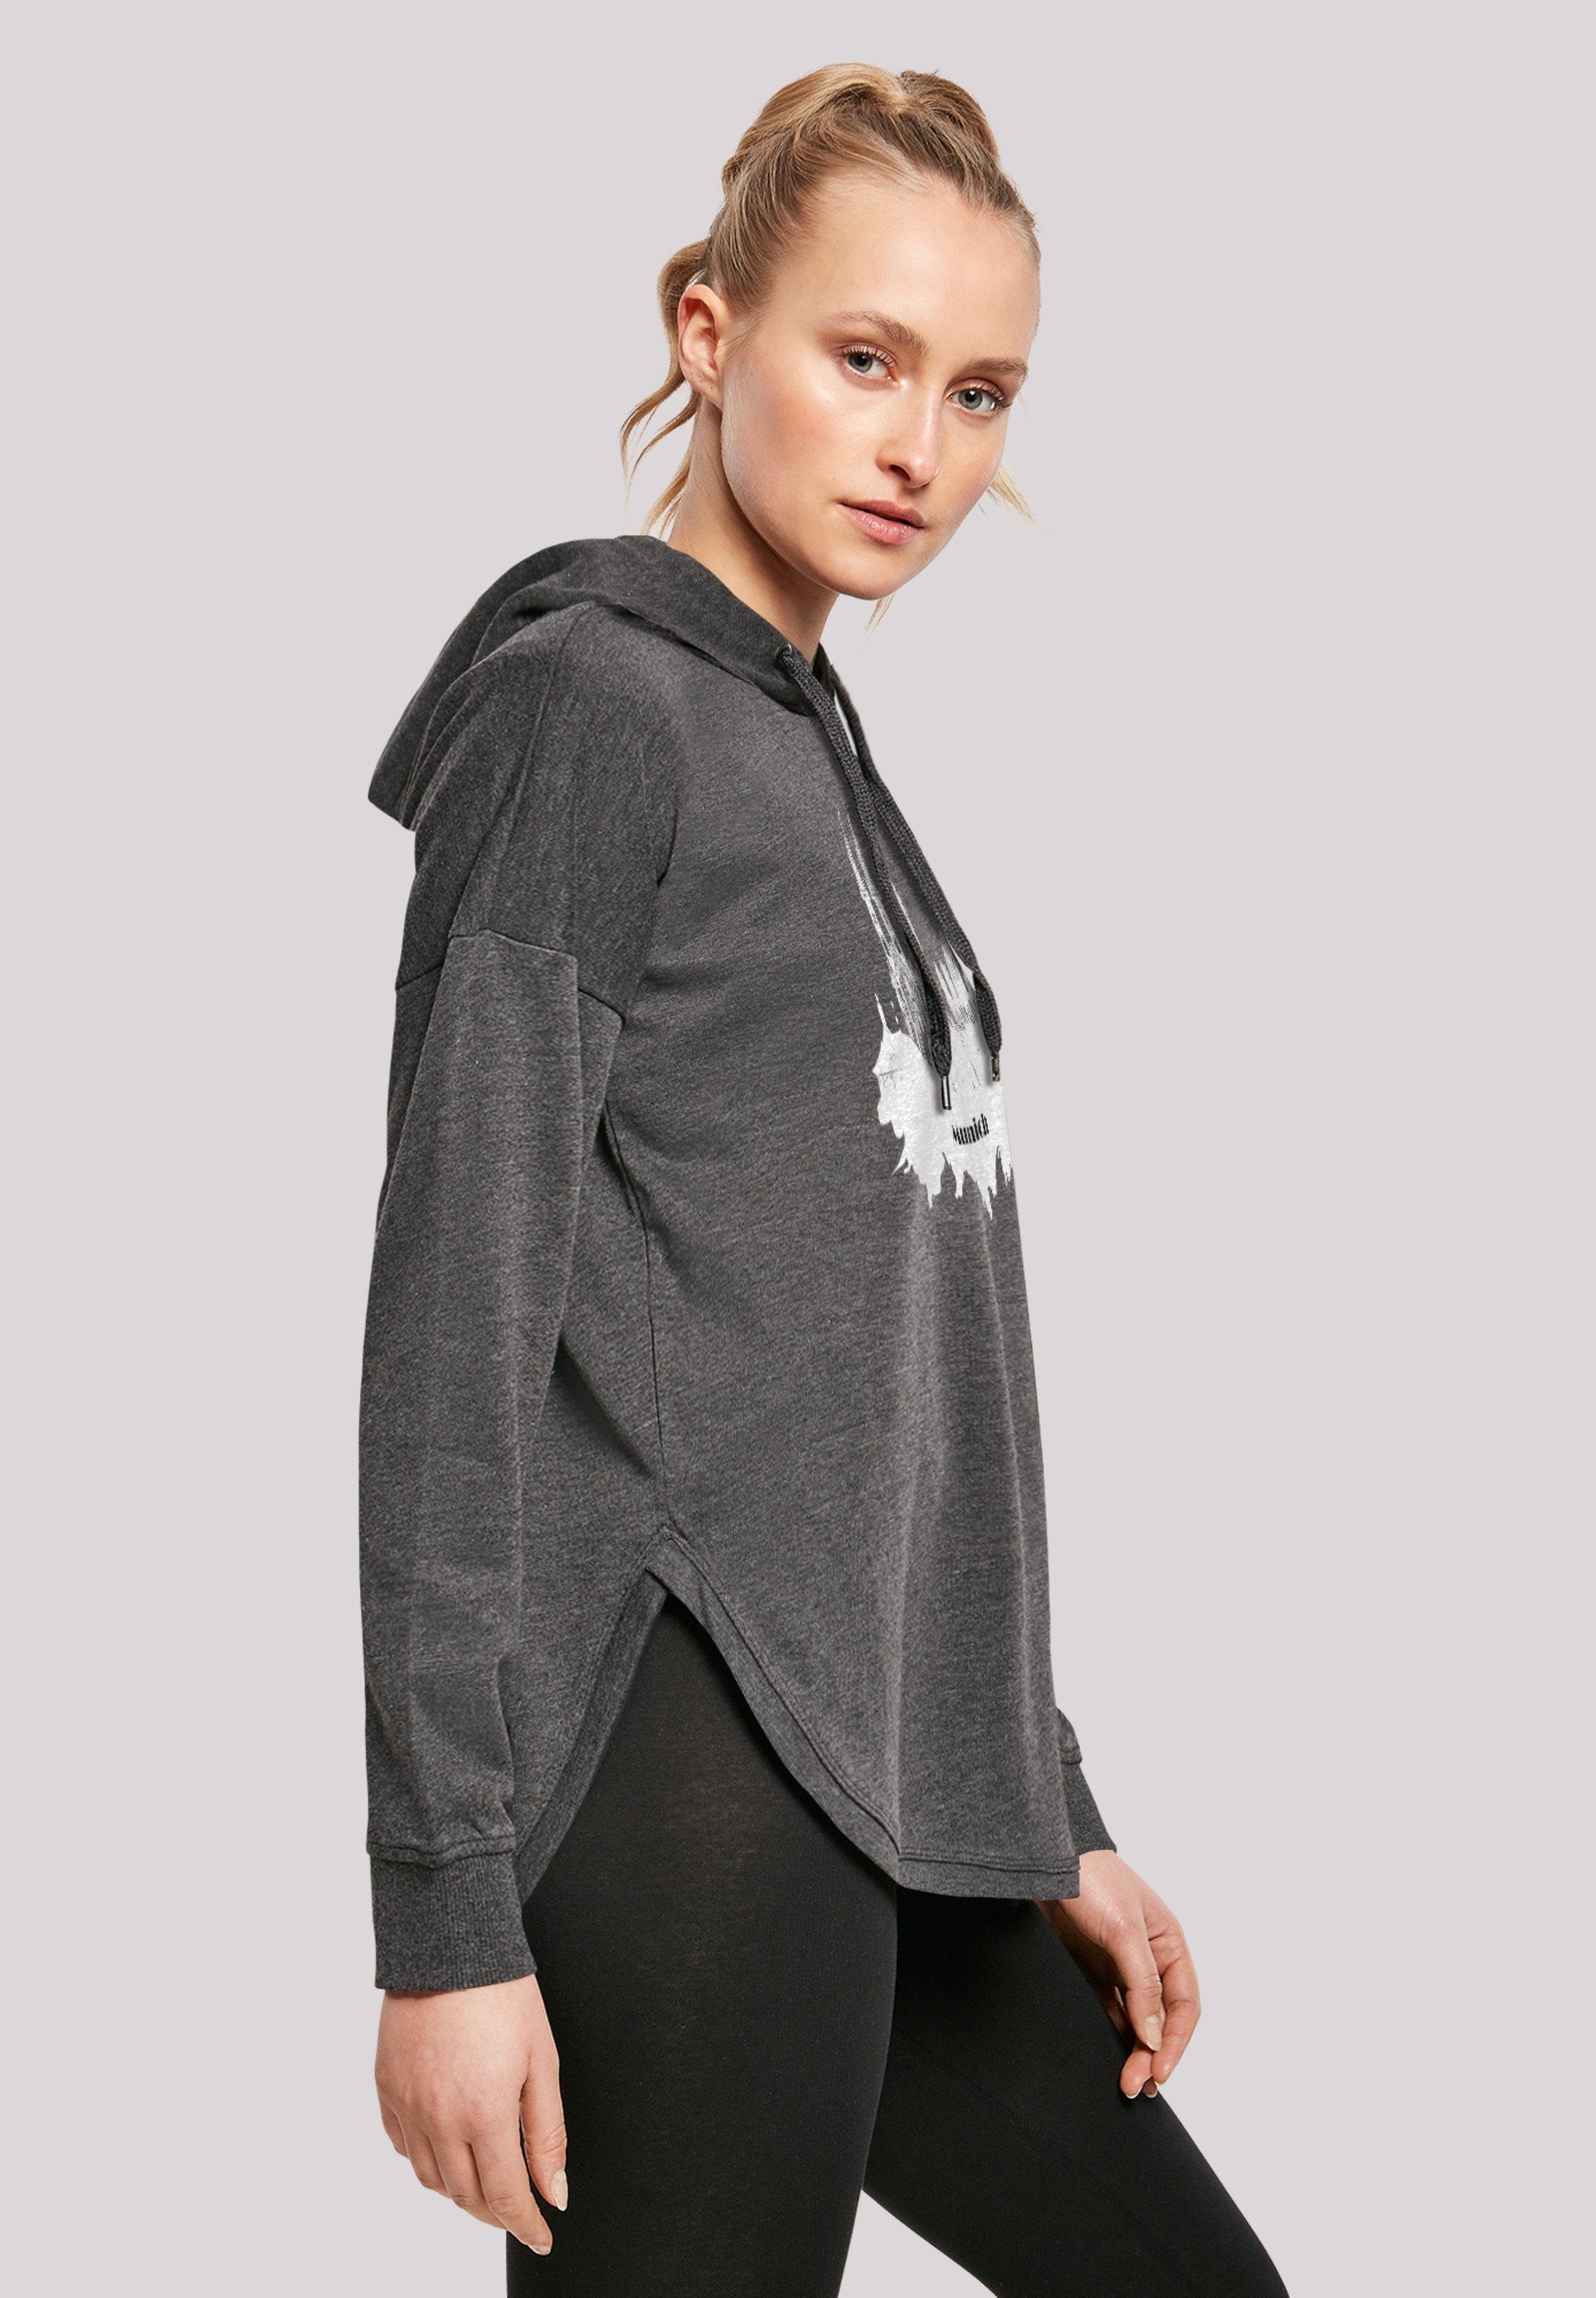 F4NT4STIC Kapuzenpullover Cities Munich Collection - charcoal Print skyline